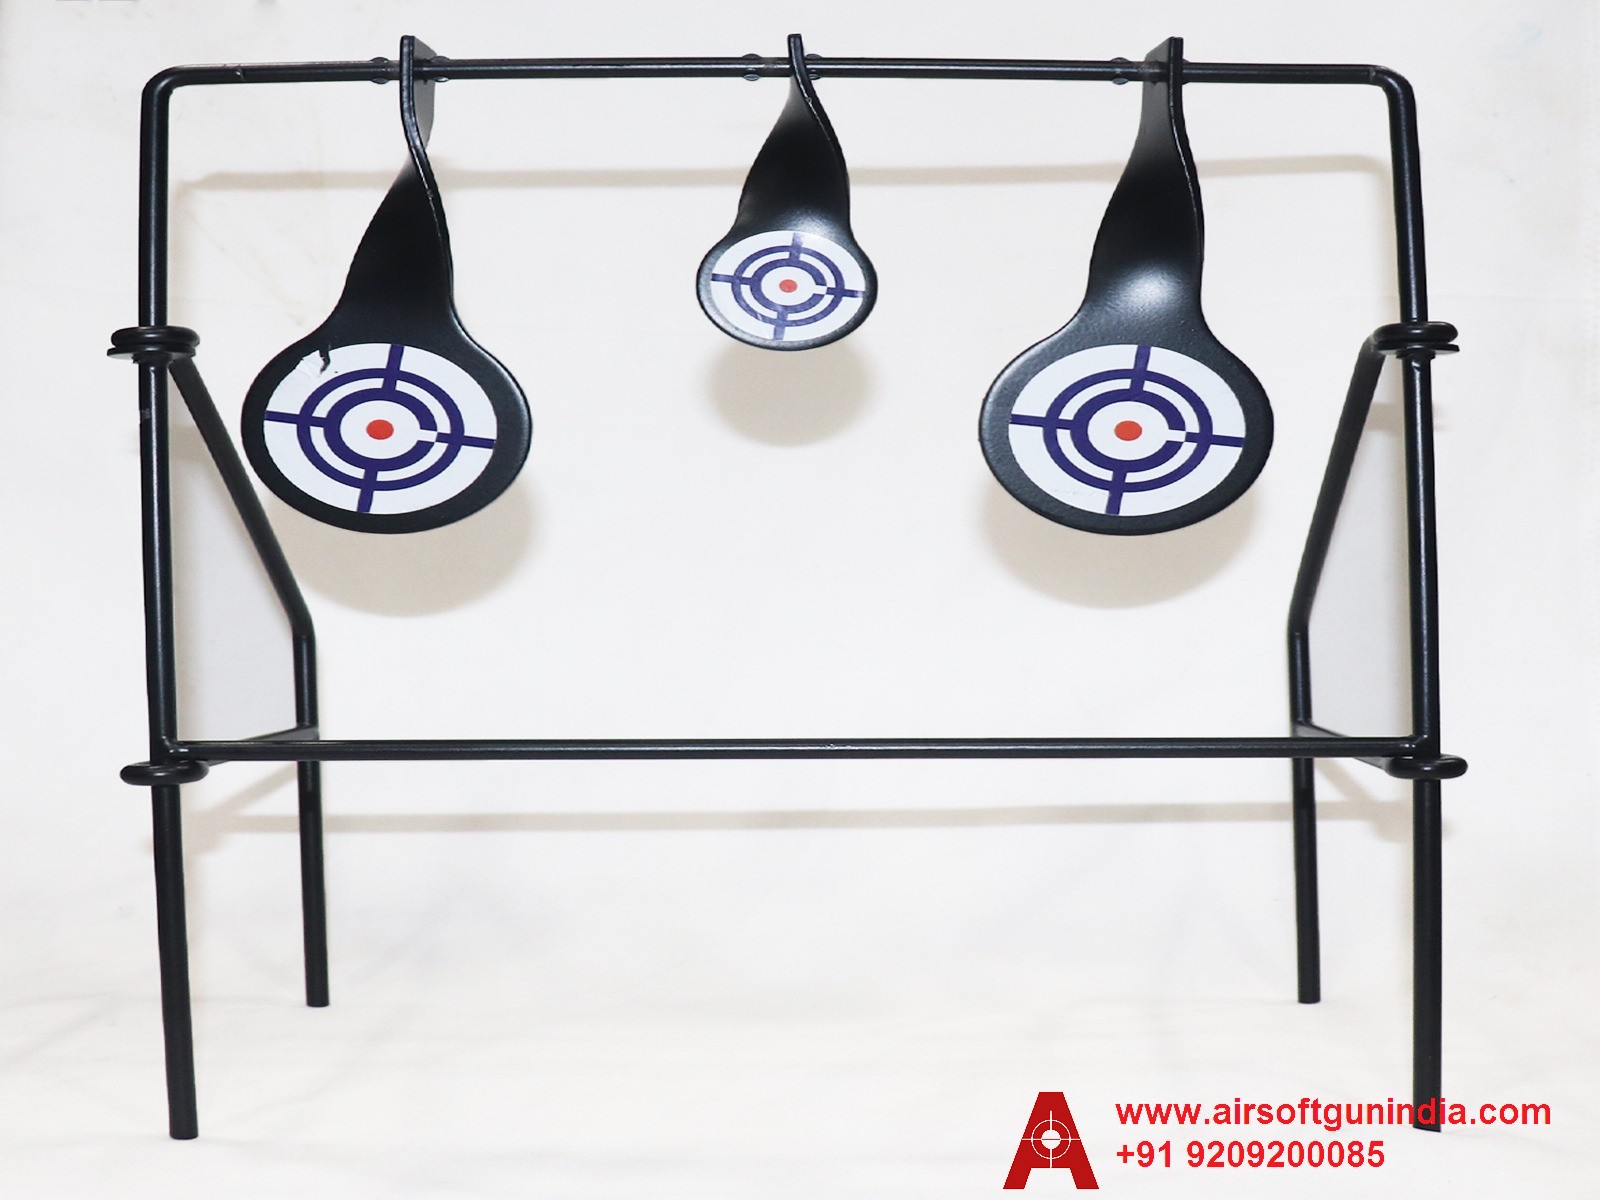 METAL TARGET WITH 3 PADDLES By Airsoft Gun India